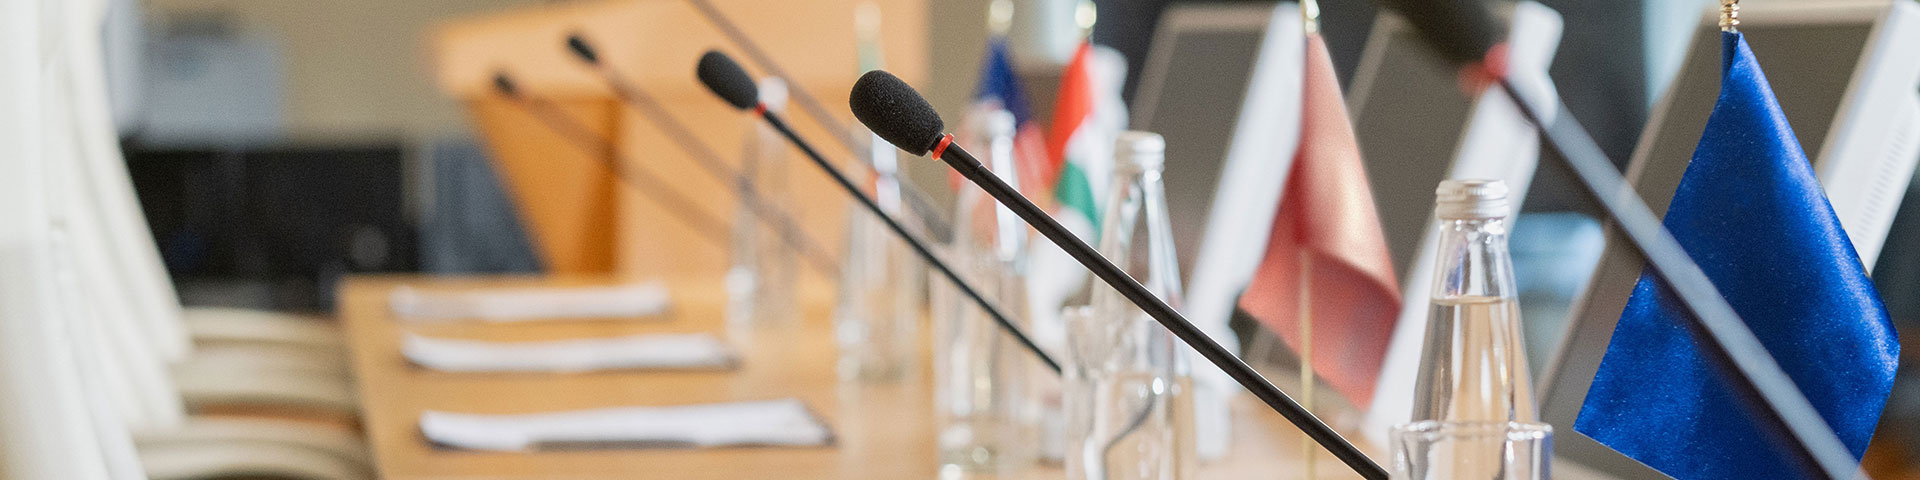 Microphones on a table with different national flags.